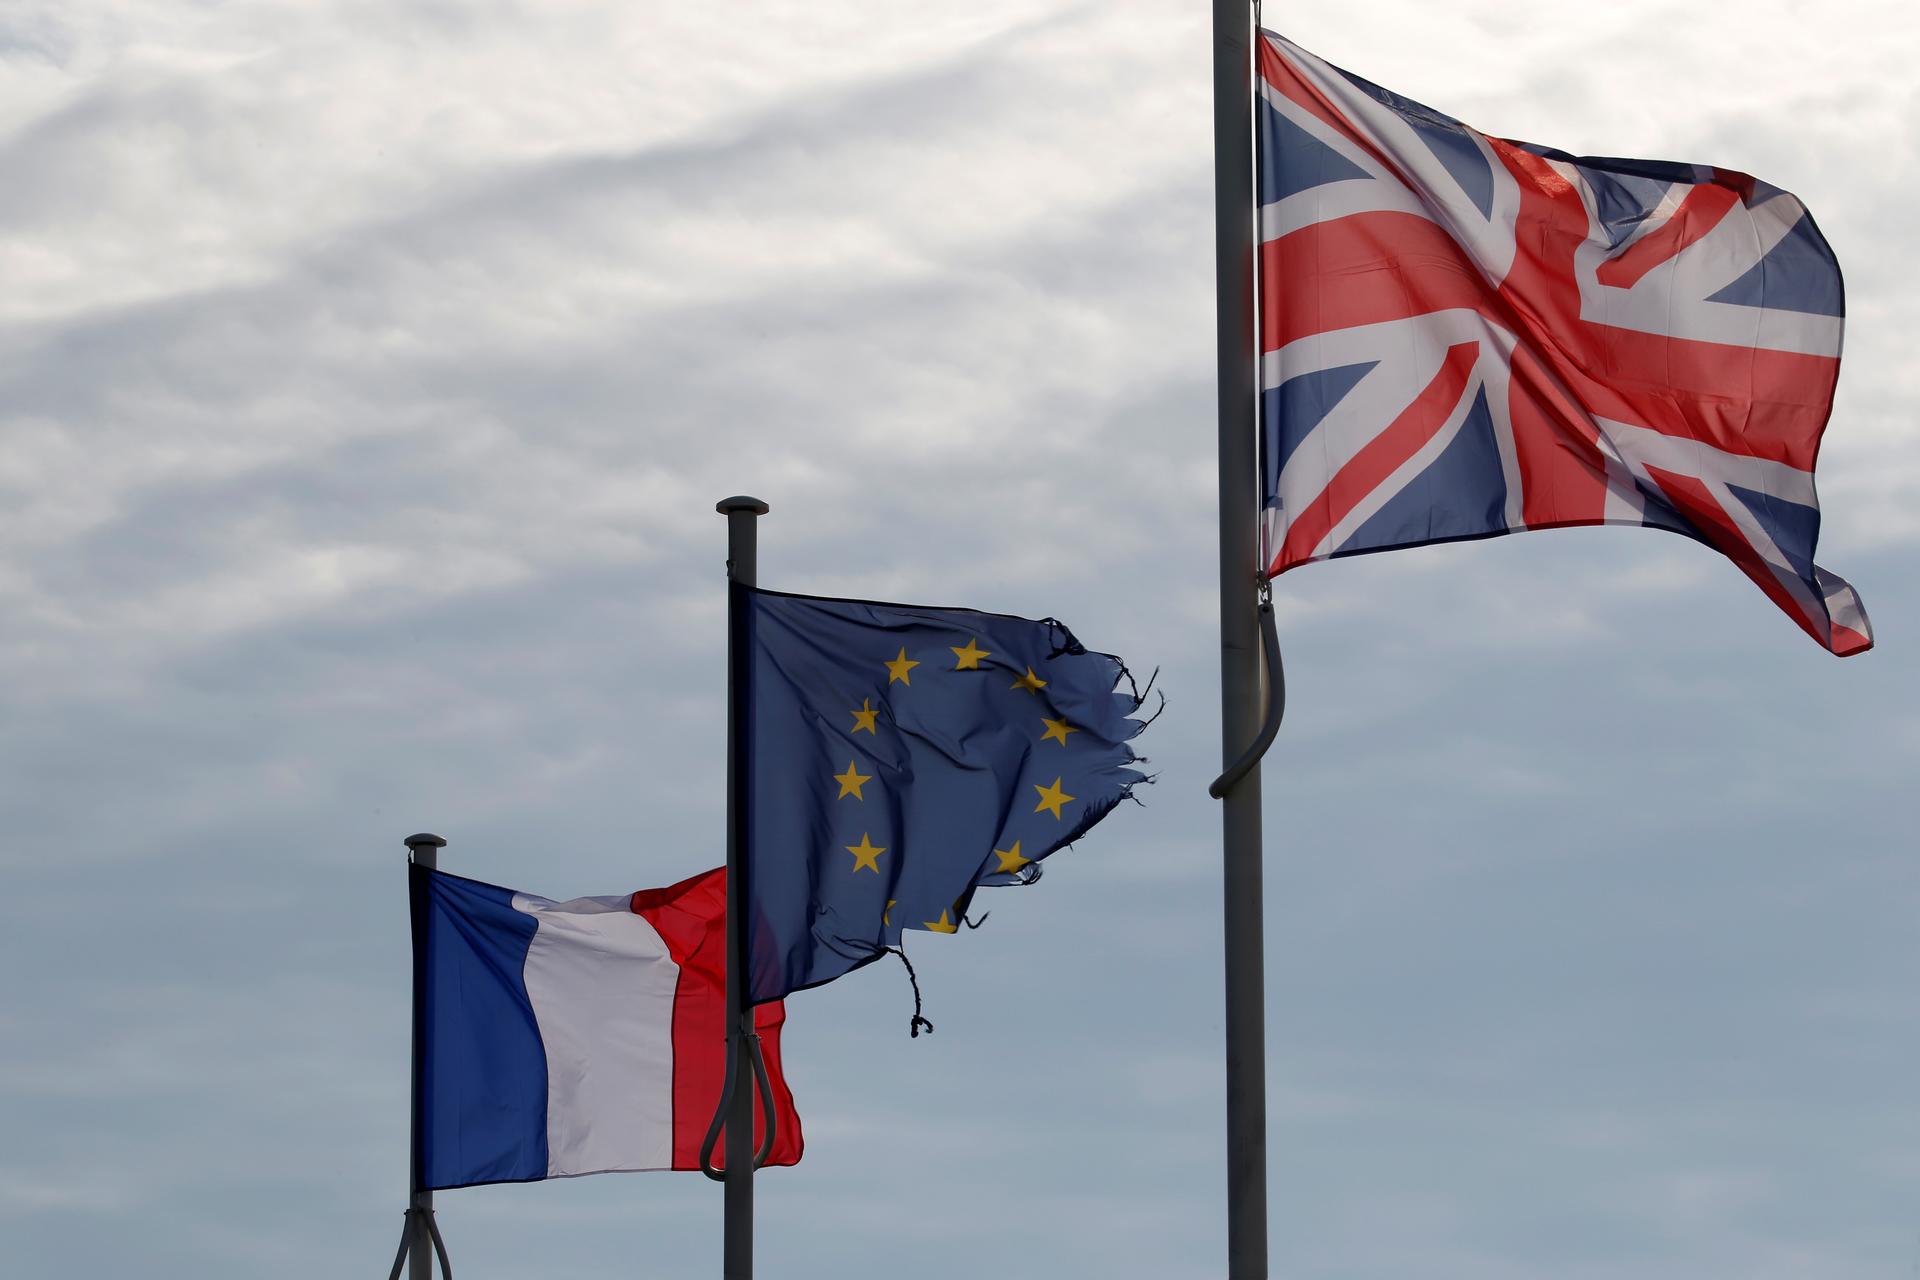 The French, European Union, and British Flags.